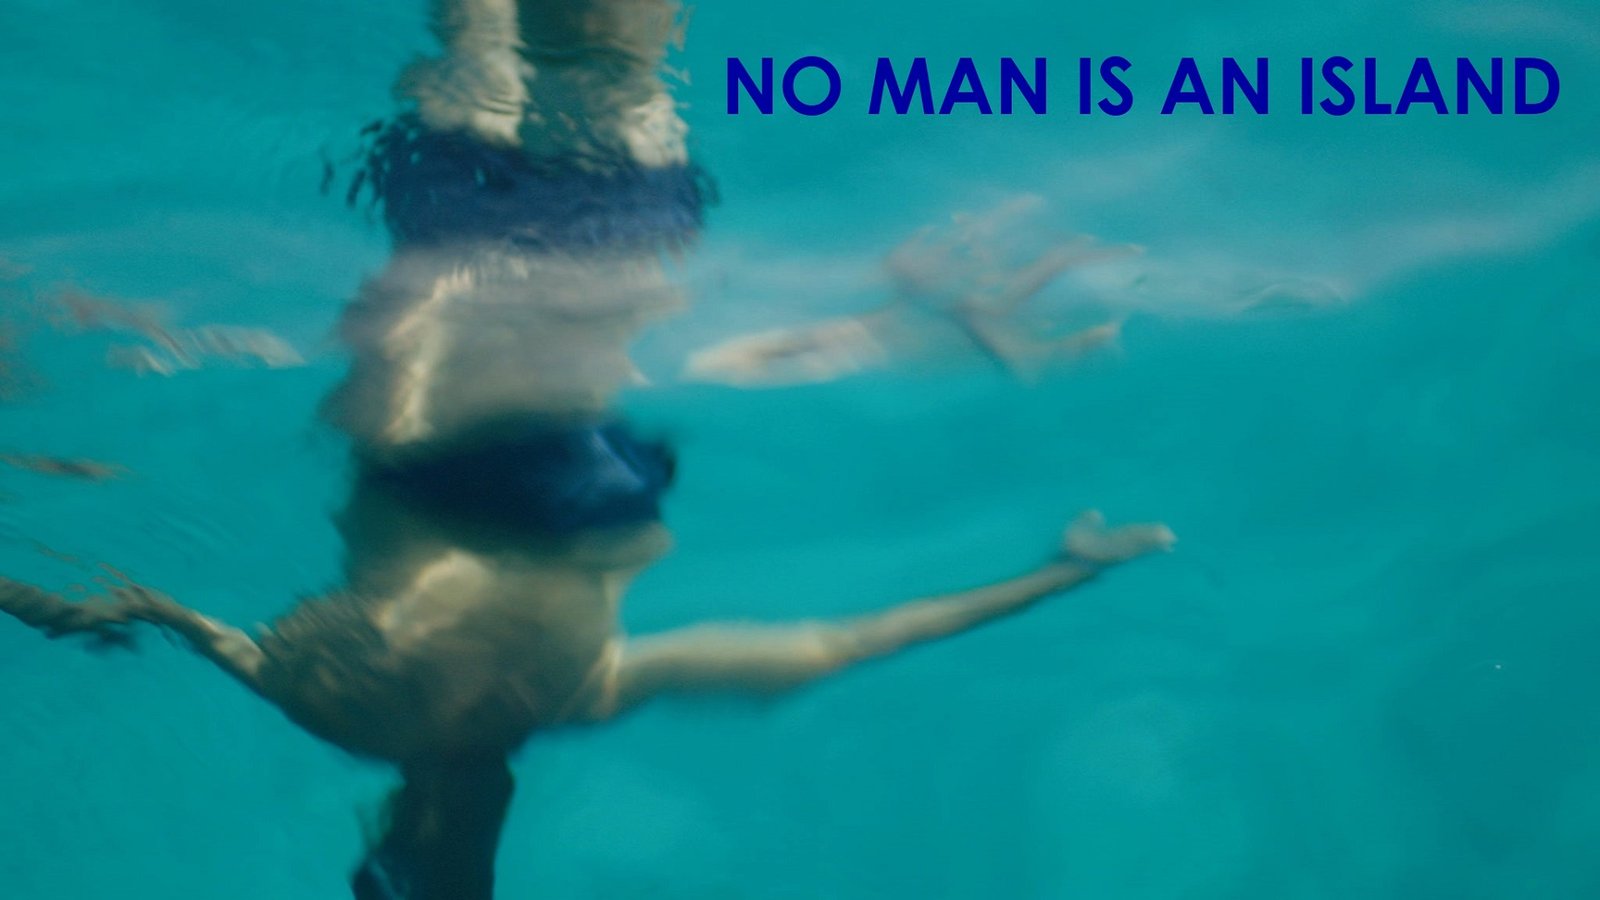 No Man is an Island - The Refugee Experience